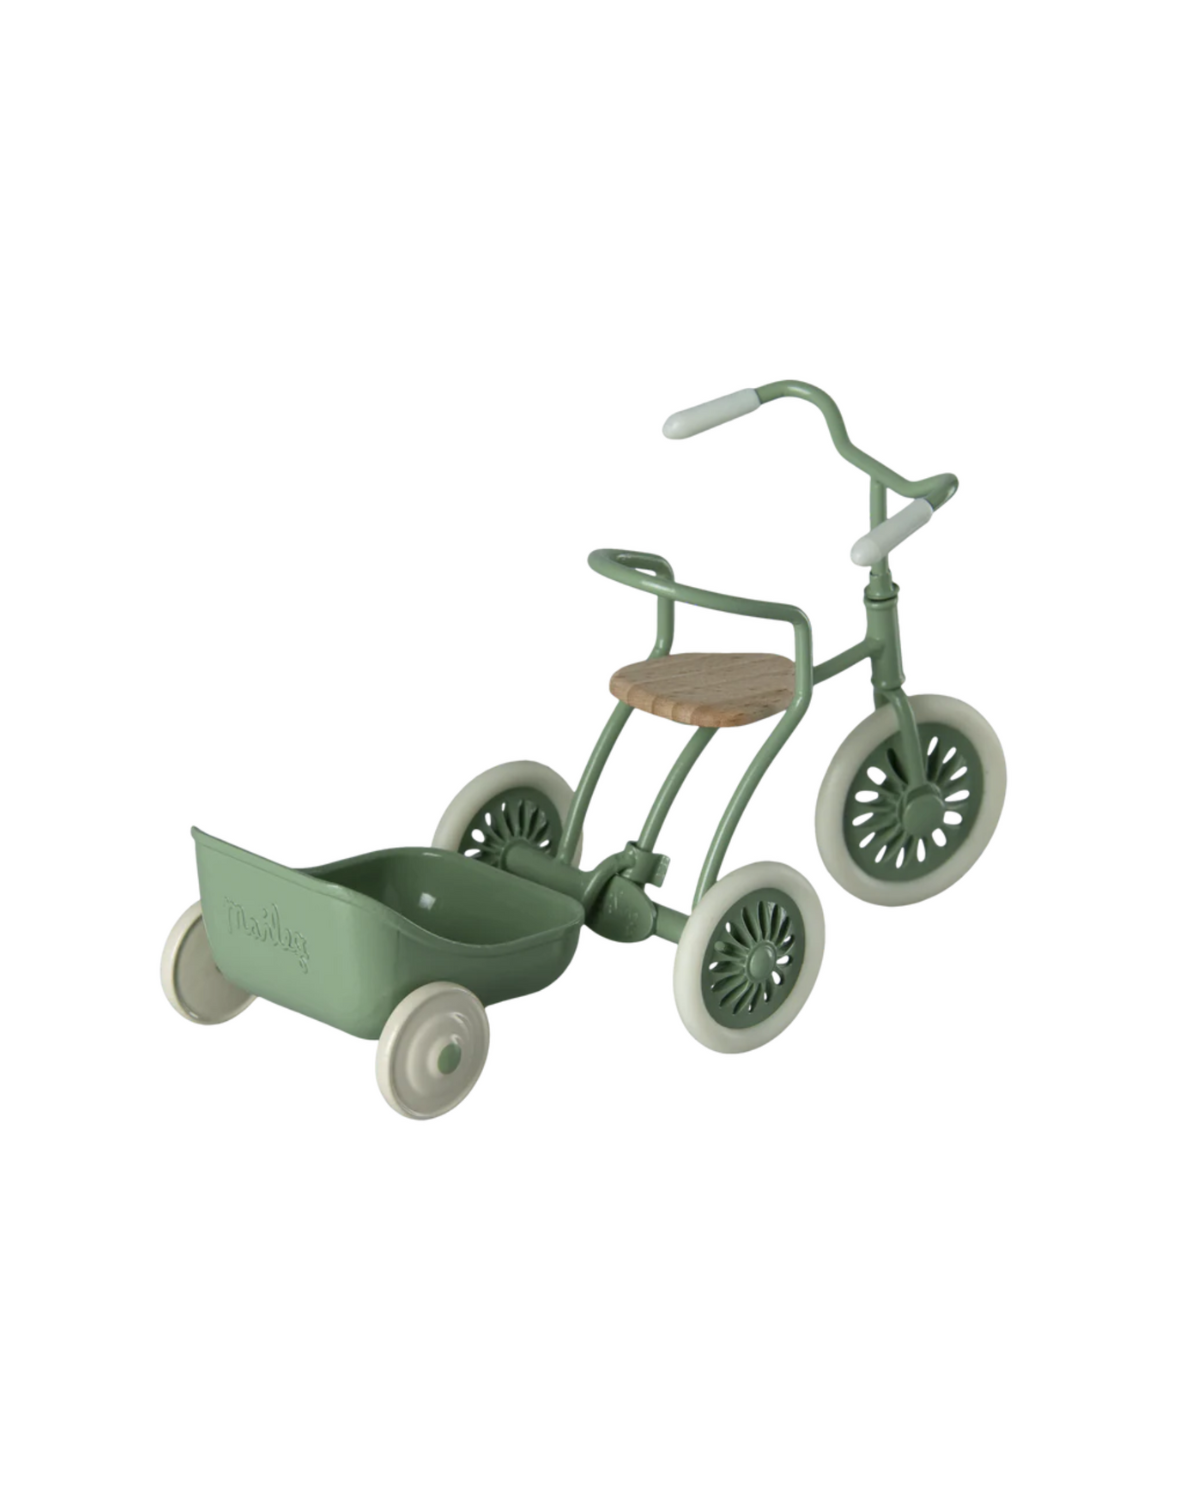 Maileg Mouse Green Tricycle Hanger: Dollhouse Accessory